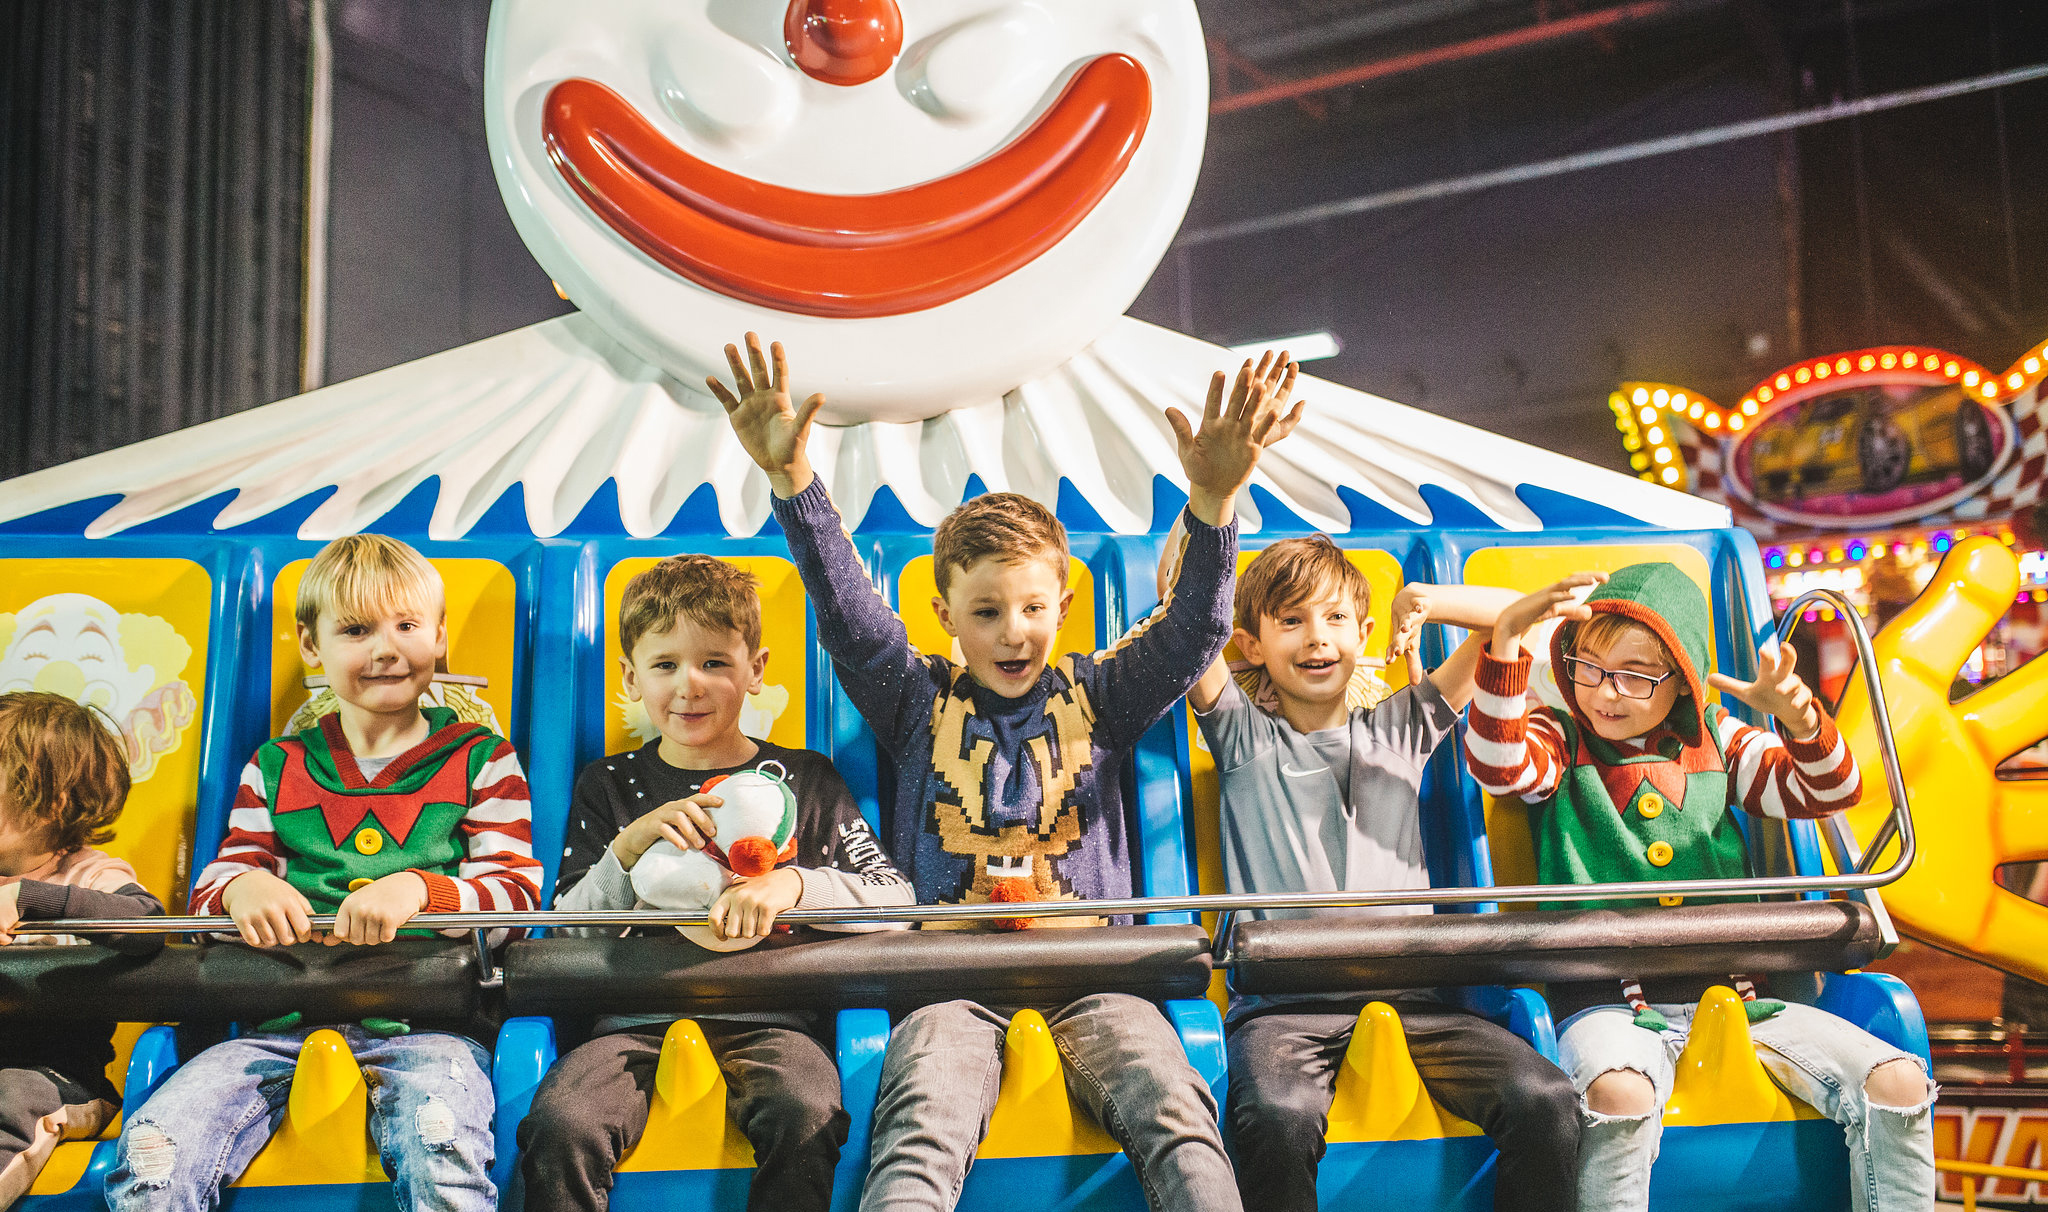 Five children on a fair ground ride with arms in the air and smiling